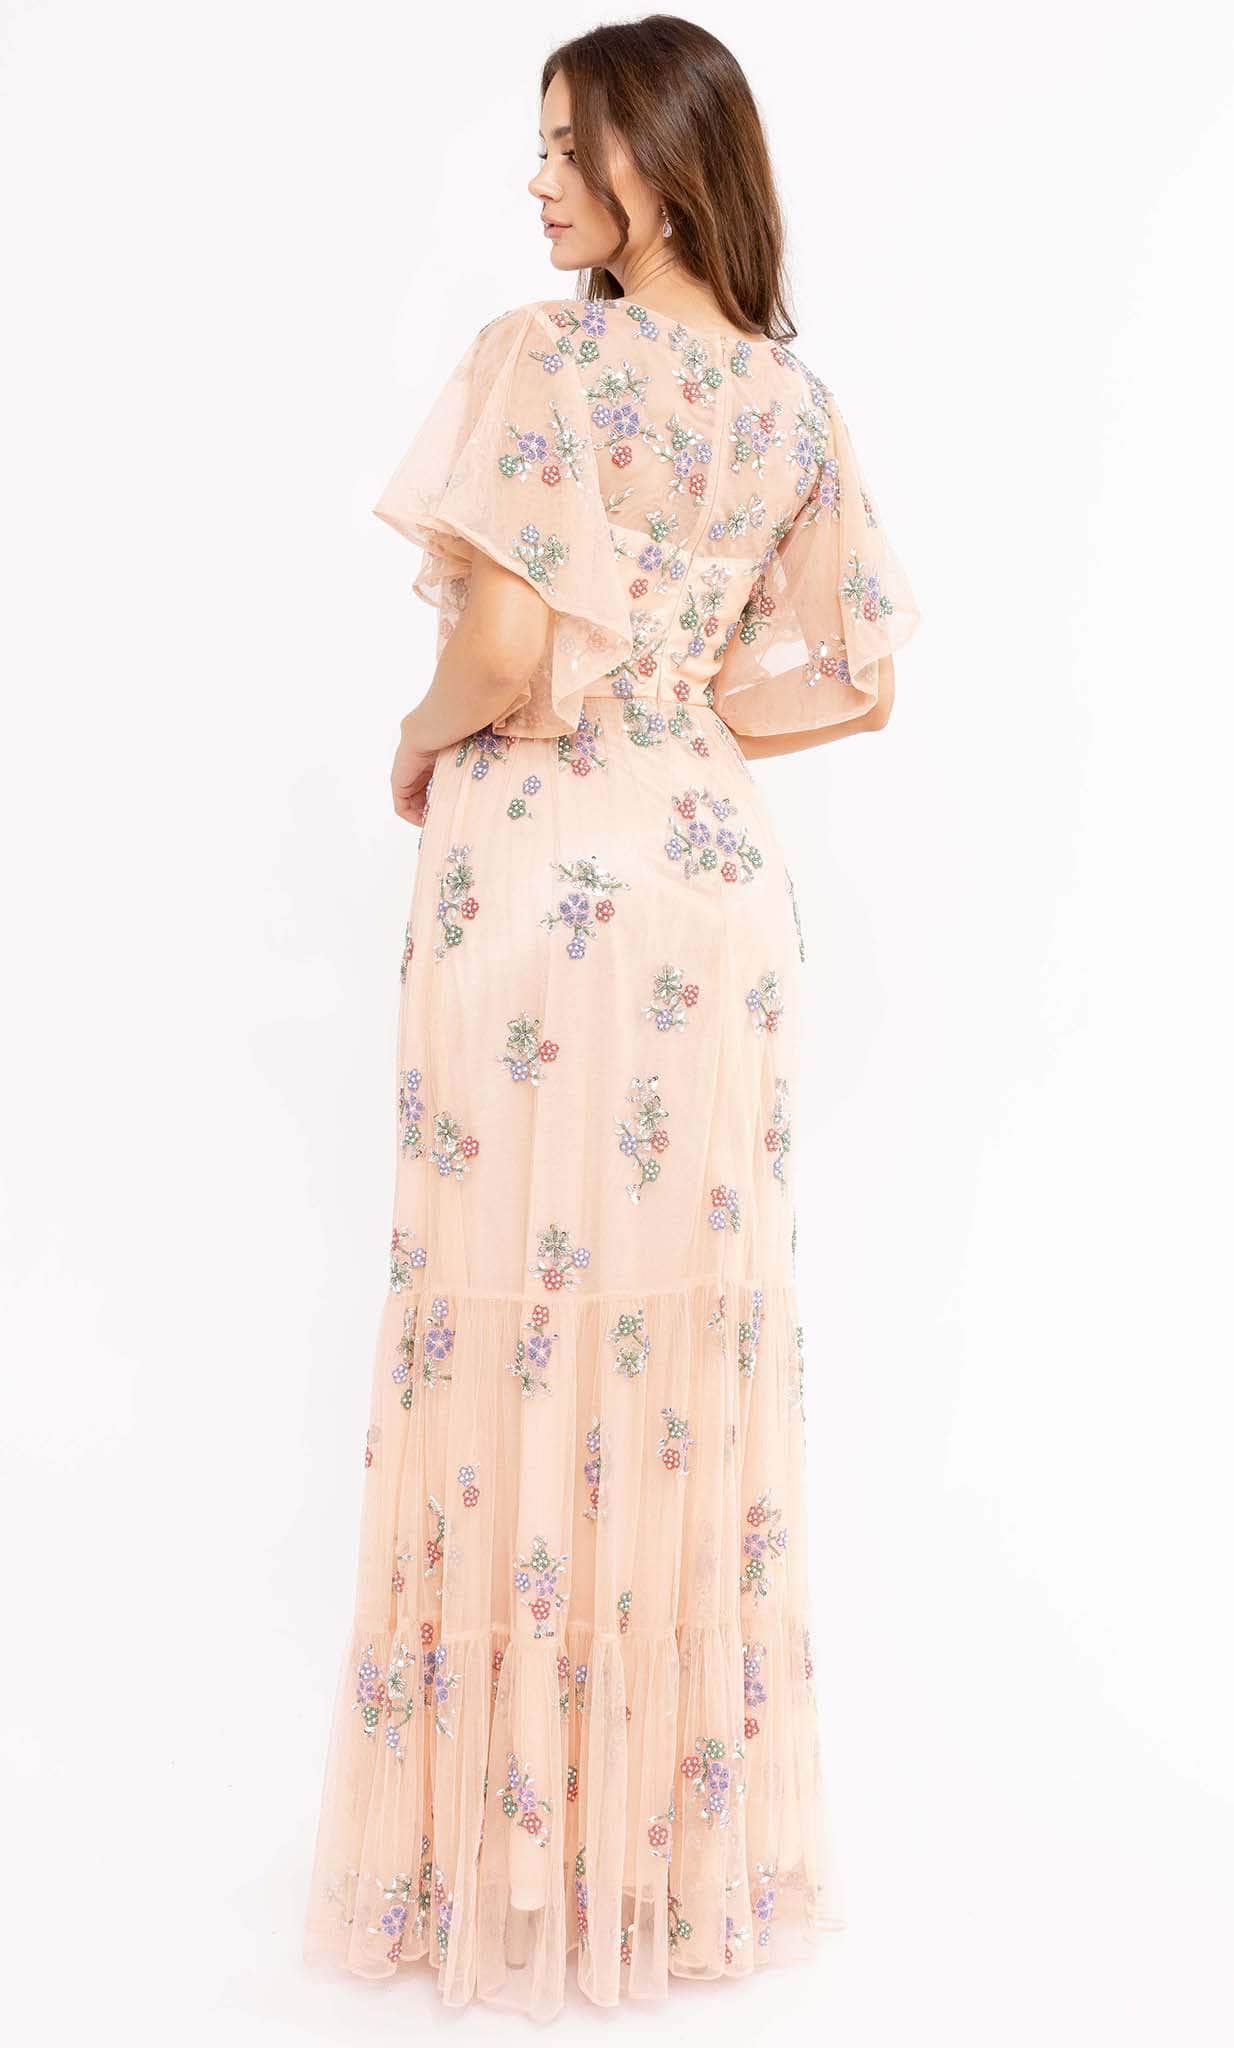 Primavera Couture 13108 - Soft-Looking Floral Long Dress Mother Of The Bride Dresses